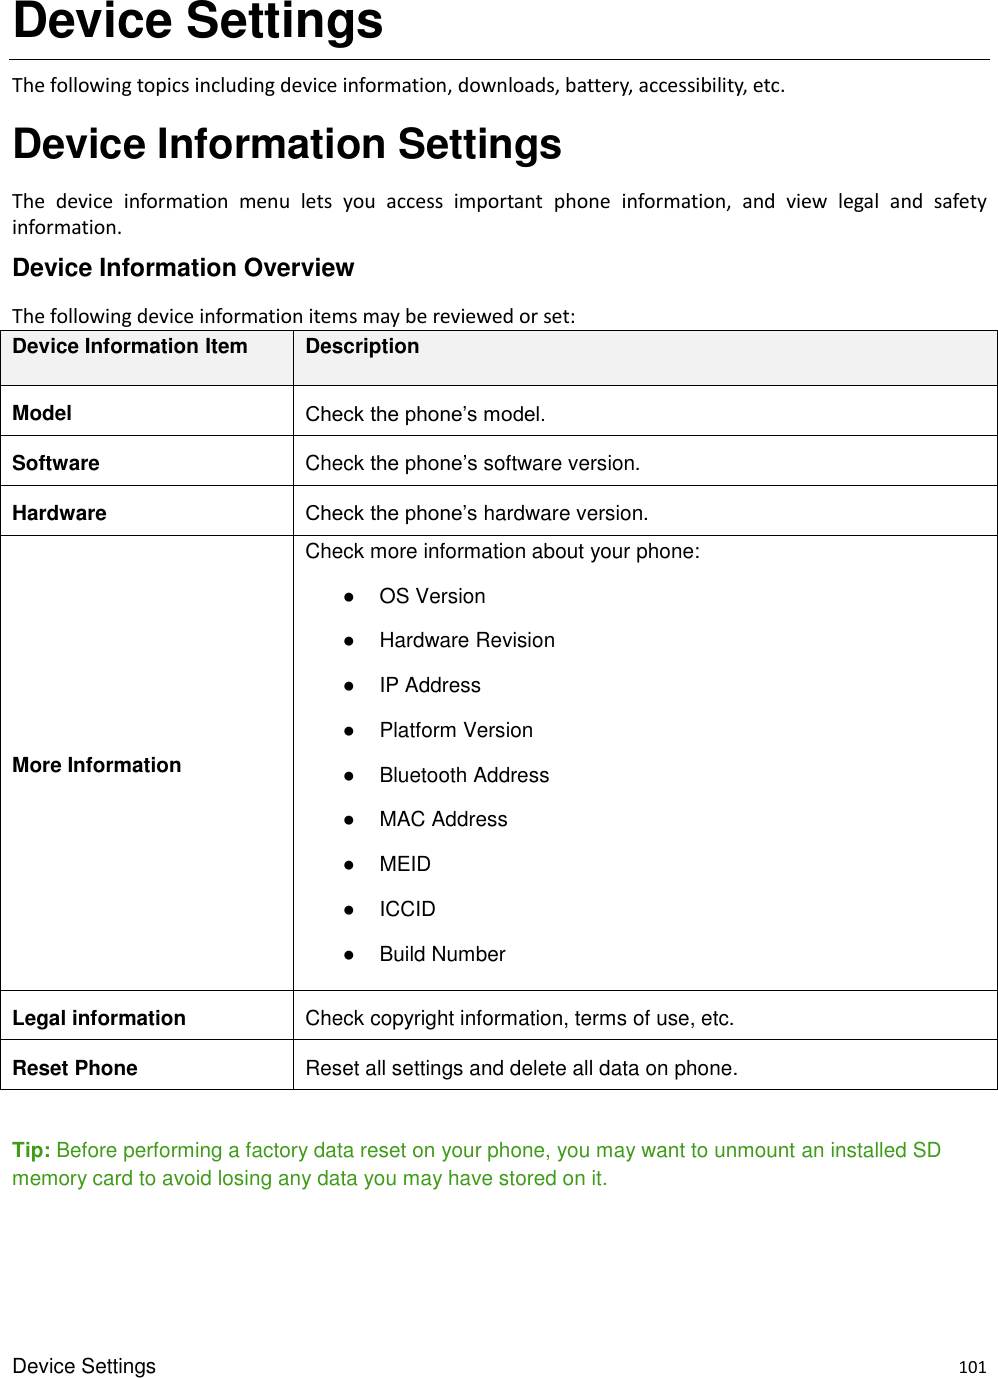 Device Settings    101 Device Settings The following topics including device information, downloads, battery, accessibility, etc. Device Information Settings The  device  information  menu  lets  you  access  important  phone  information,  and  view  legal  and  safety information. Device Information Overview The following device information items may be reviewed or set:   Device Information Item Description Model Check the phone’s model. Software Check the phone’s software version. Hardware Check the phone’s hardware version. More Information Check more information about your phone: ●  OS Version ●  Hardware Revision ●  IP Address ●  Platform Version ●  Bluetooth Address ●  MAC Address ●  MEID ●  ICCID ●  Build Number Legal information Check copyright information, terms of use, etc. Reset Phone Reset all settings and delete all data on phone.  Tip: Before performing a factory data reset on your phone, you may want to unmount an installed SD memory card to avoid losing any data you may have stored on it.    